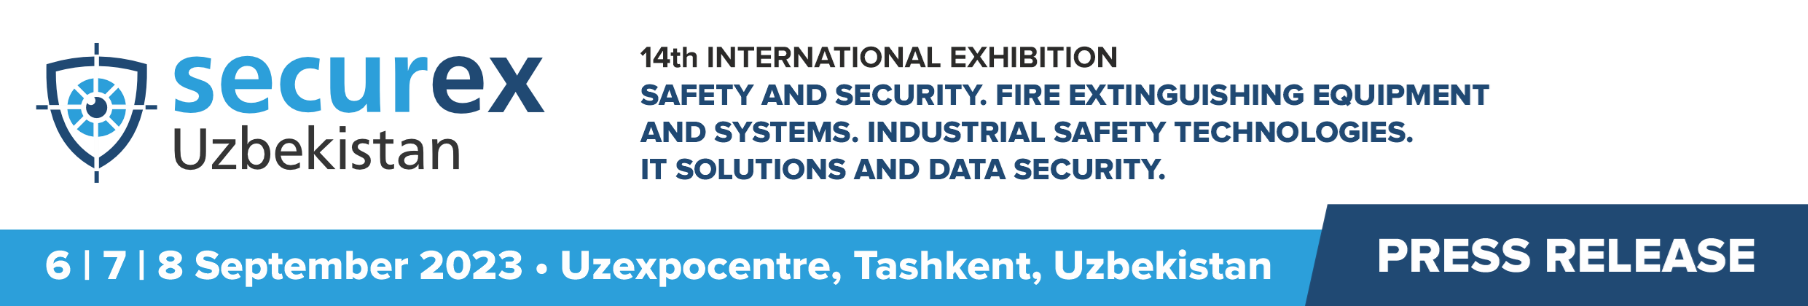 SECUREX UZBEKISTAN 2023 - INTEGRATED SAFETY AND SECURITY TECHNOLOGIES